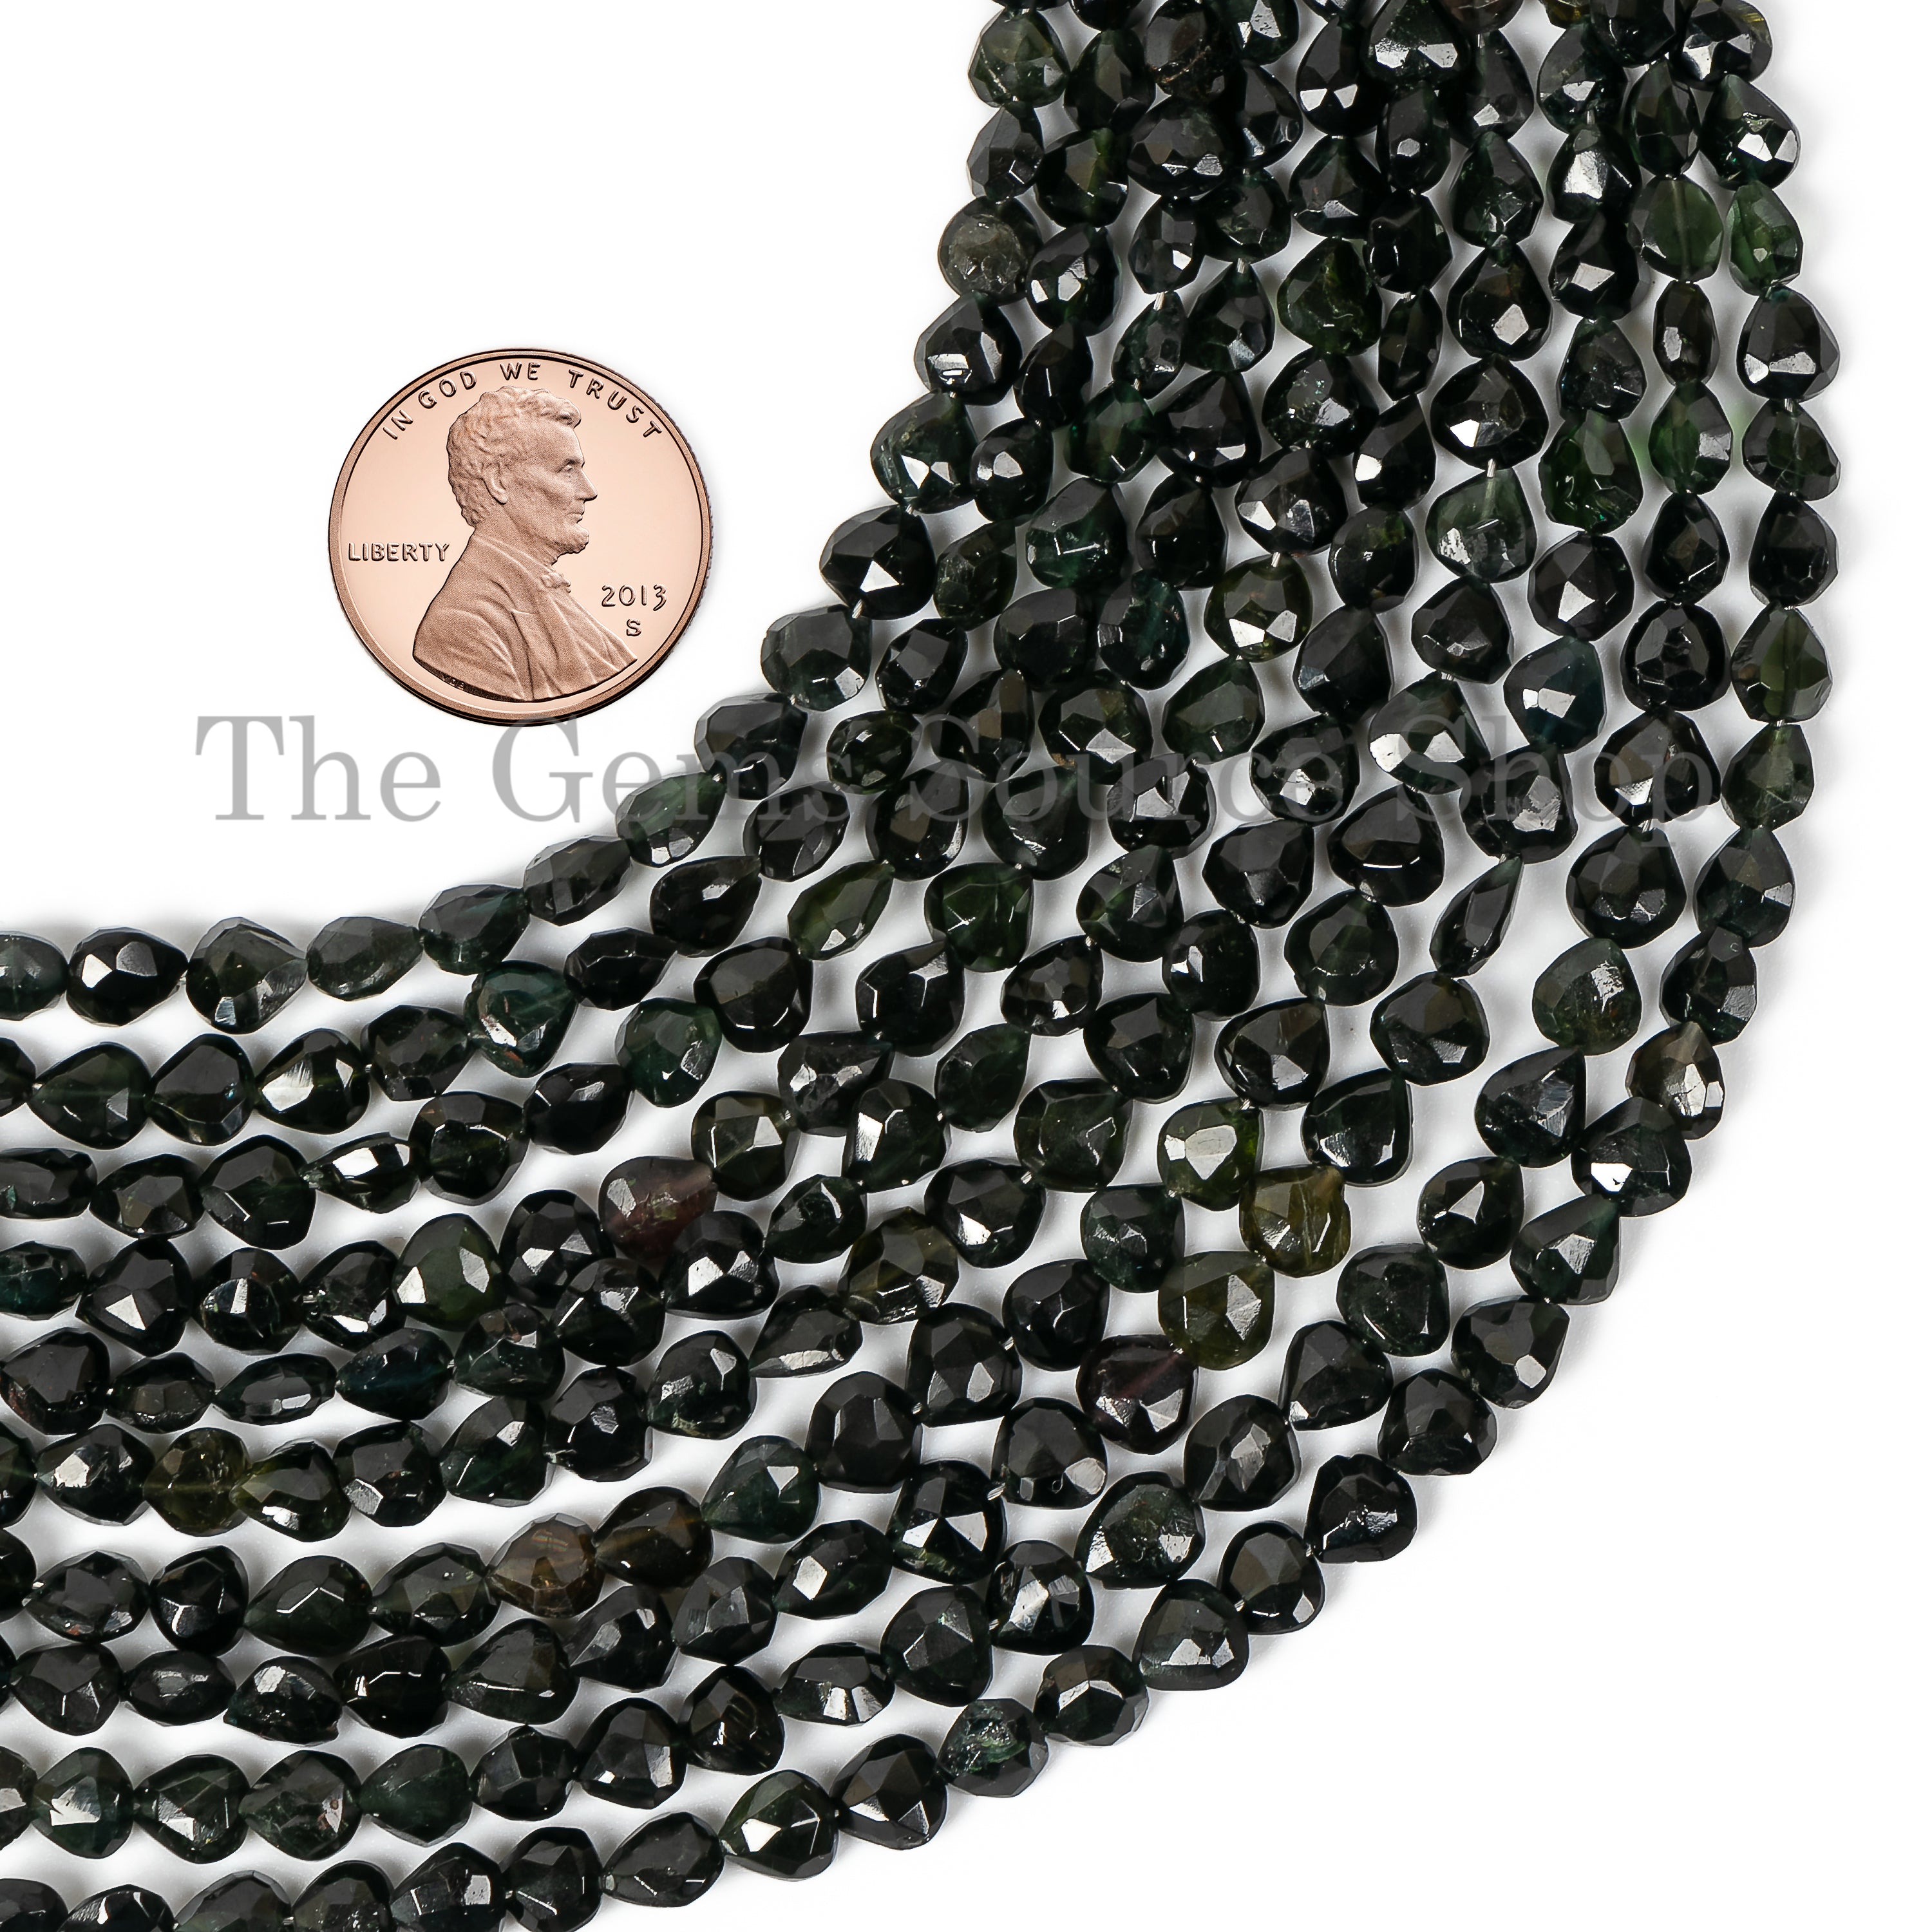 Black Tourmaline Faceted Heart Briolette, Tourmaline Heart Beads, Black Tourmaline Gemstone, Wholesale Beads, Jewelry Making Beads